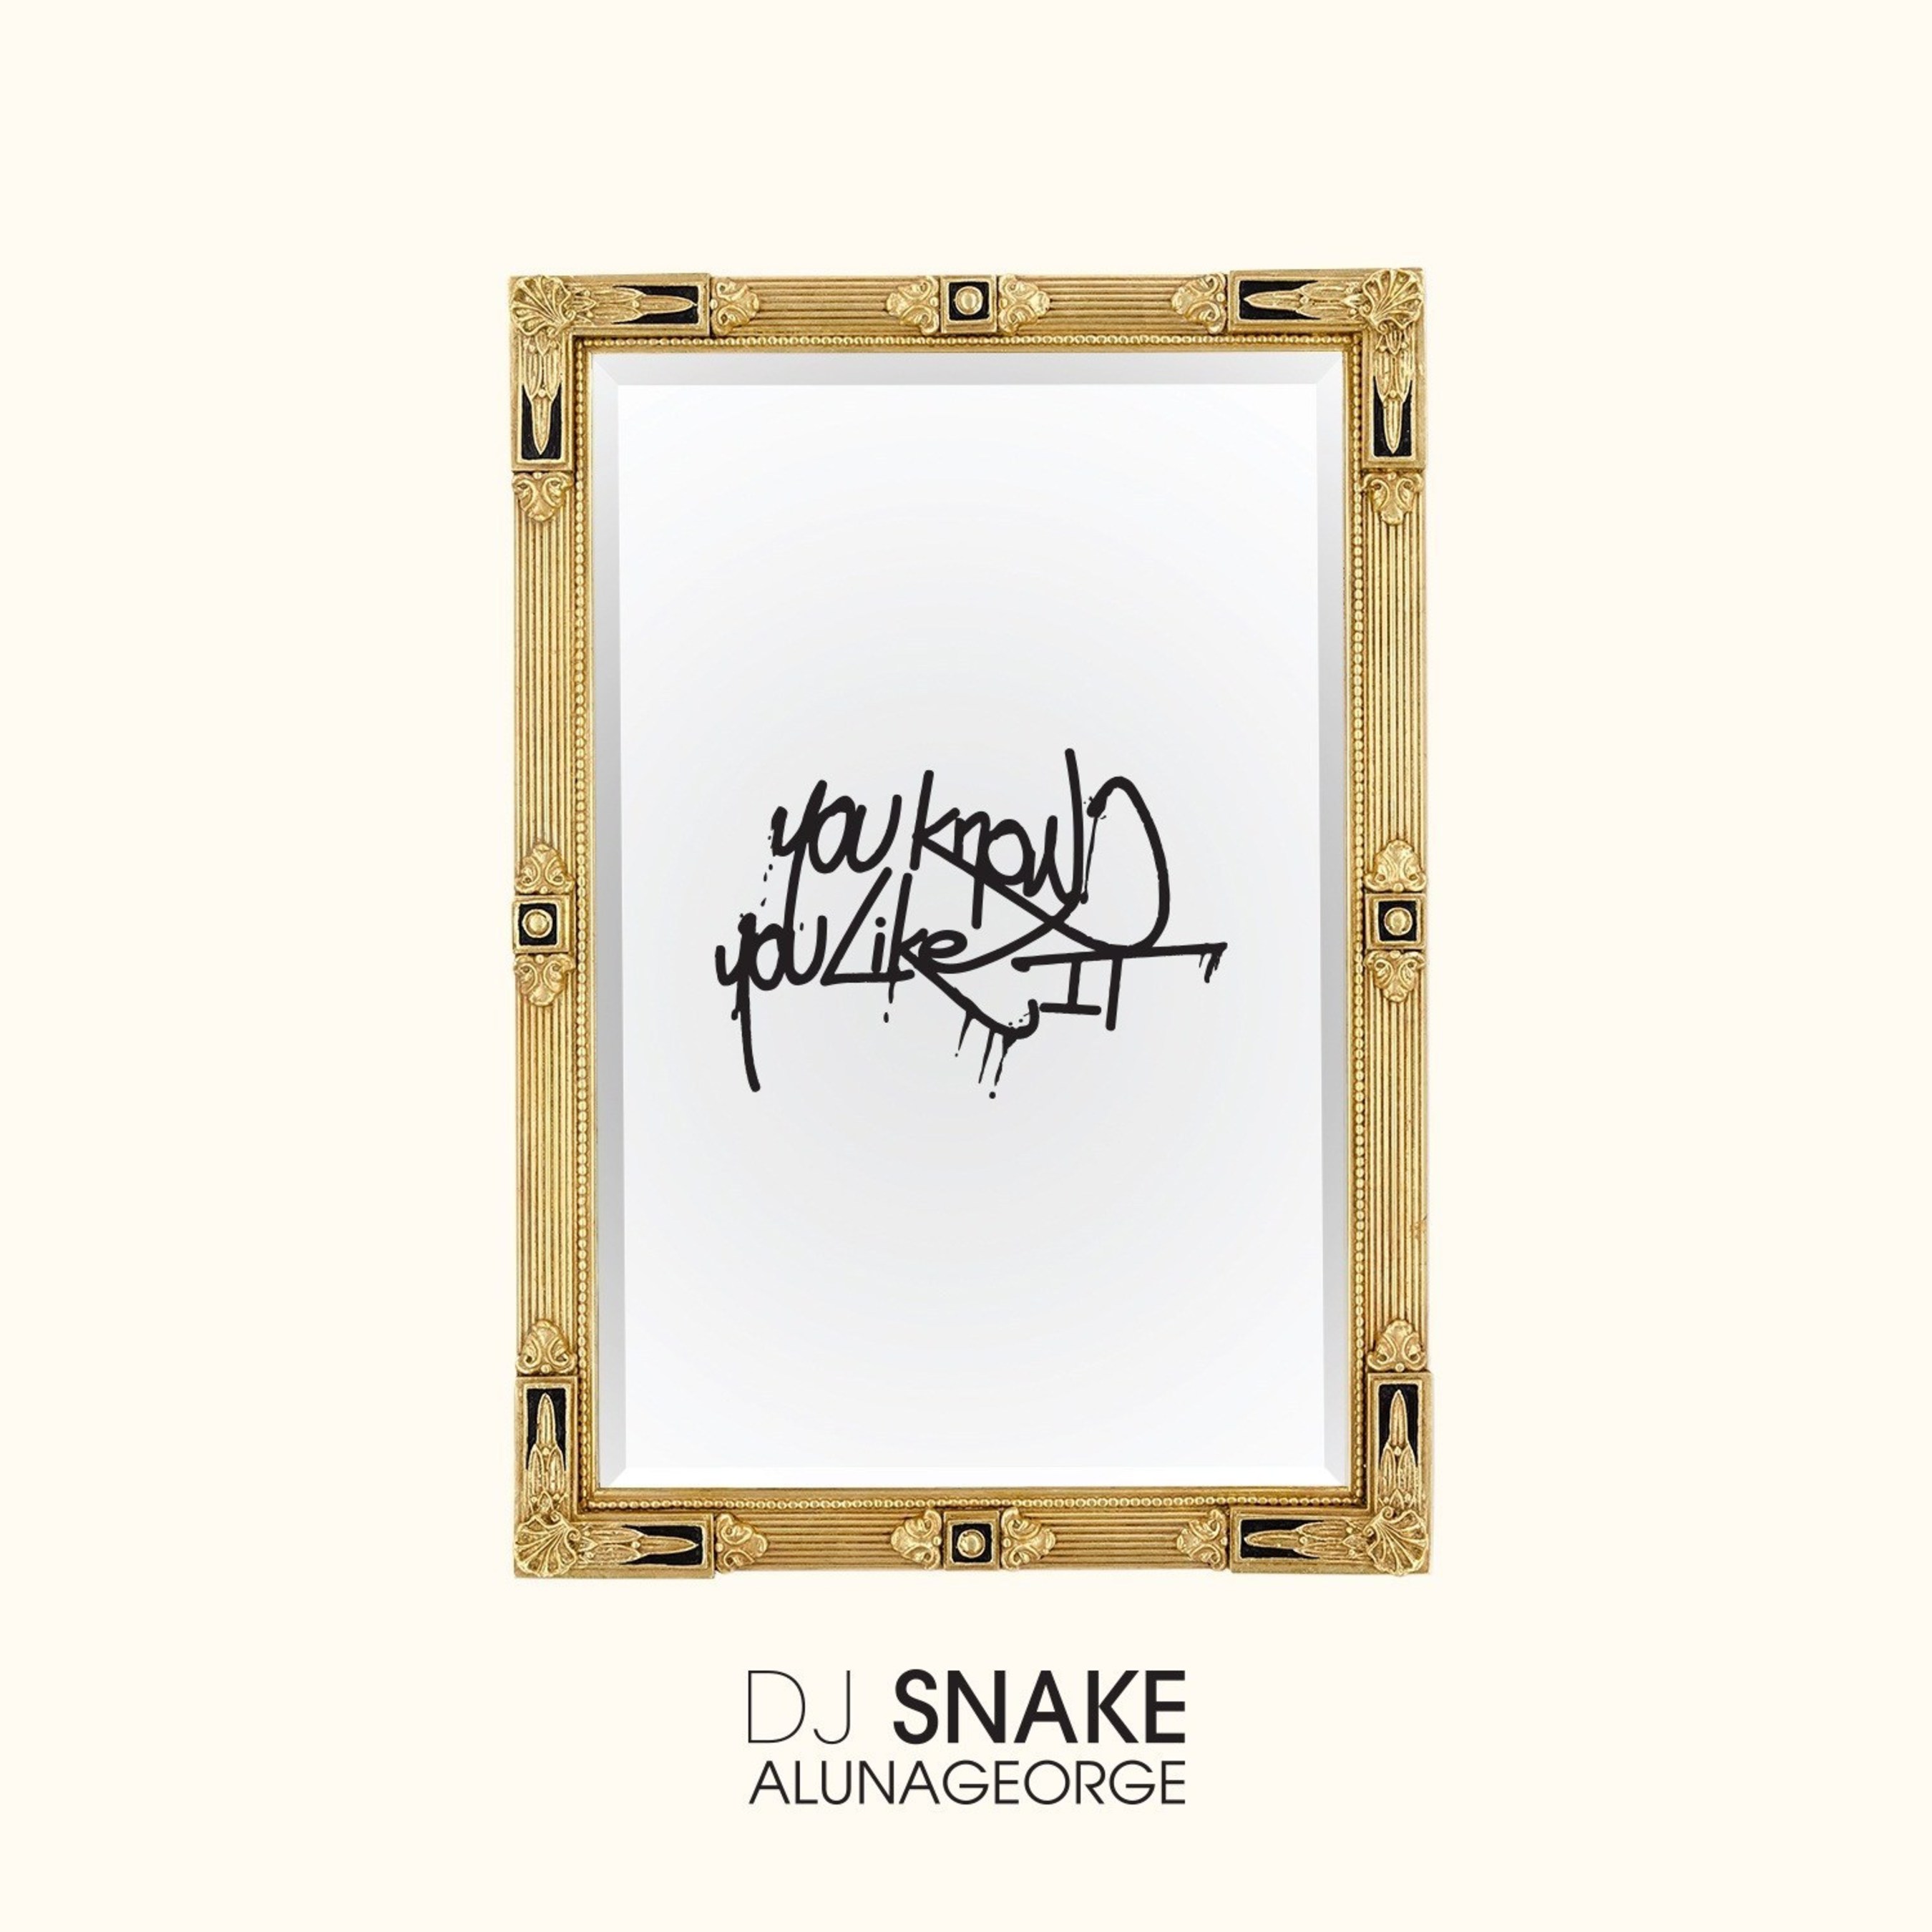 DJ SNAKE TO RELEASE SINGLE - "YOU KNOW YOU LIKE IT" WITH ALUNAGEORGE - ON DECEMBER 8TH